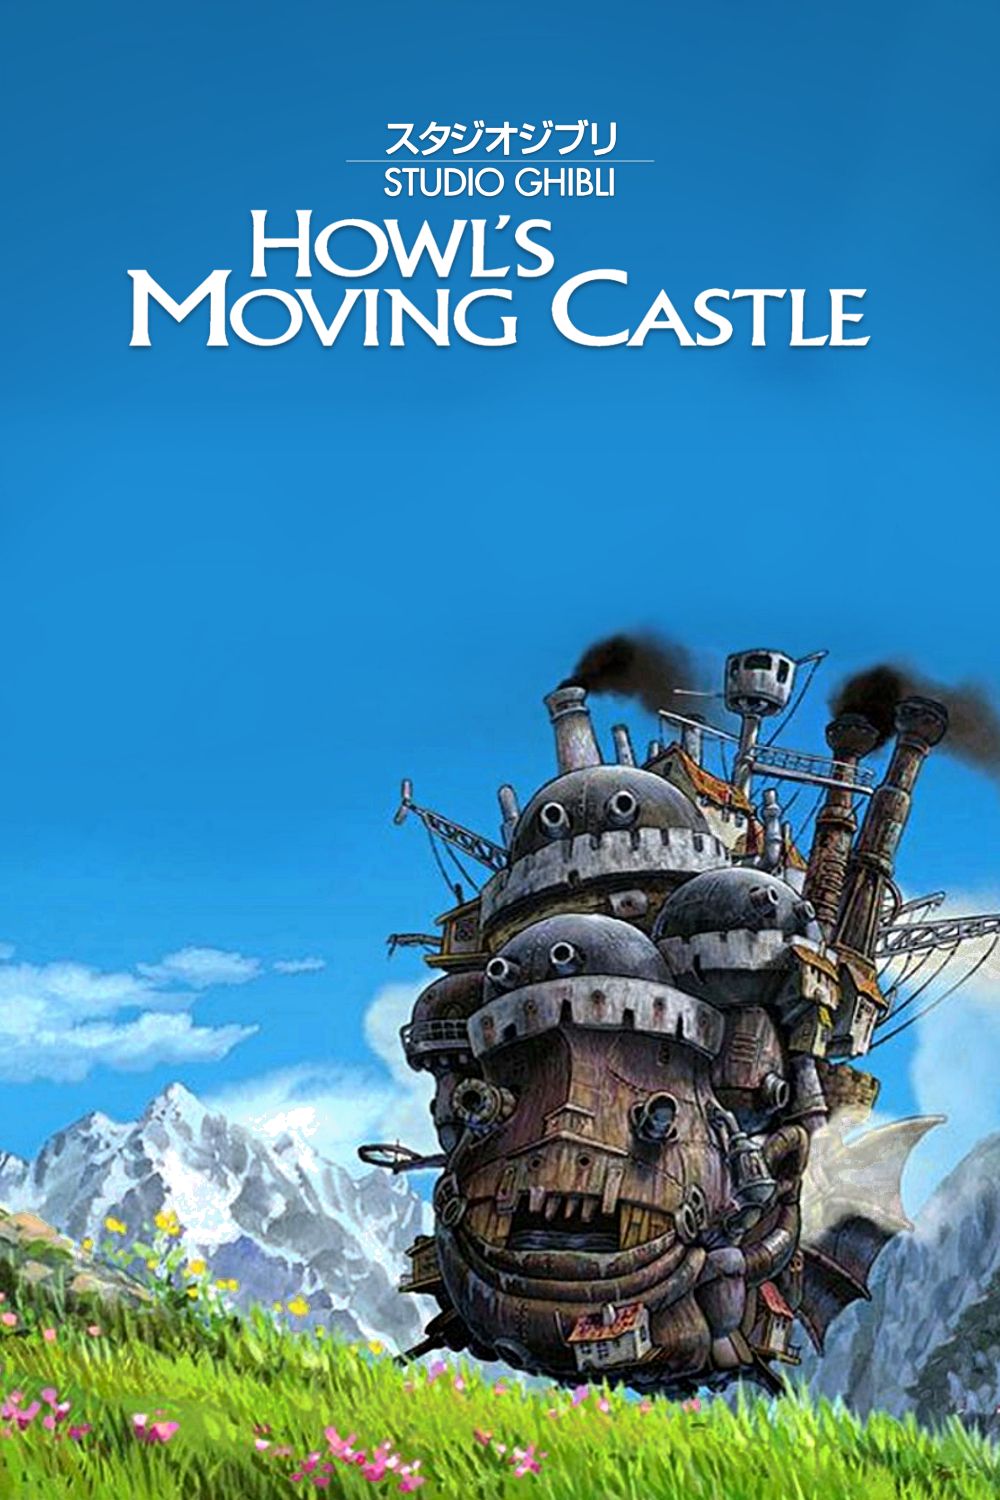 The cover art for Hayao Miyazaki's Howl's Moving Castle anime film